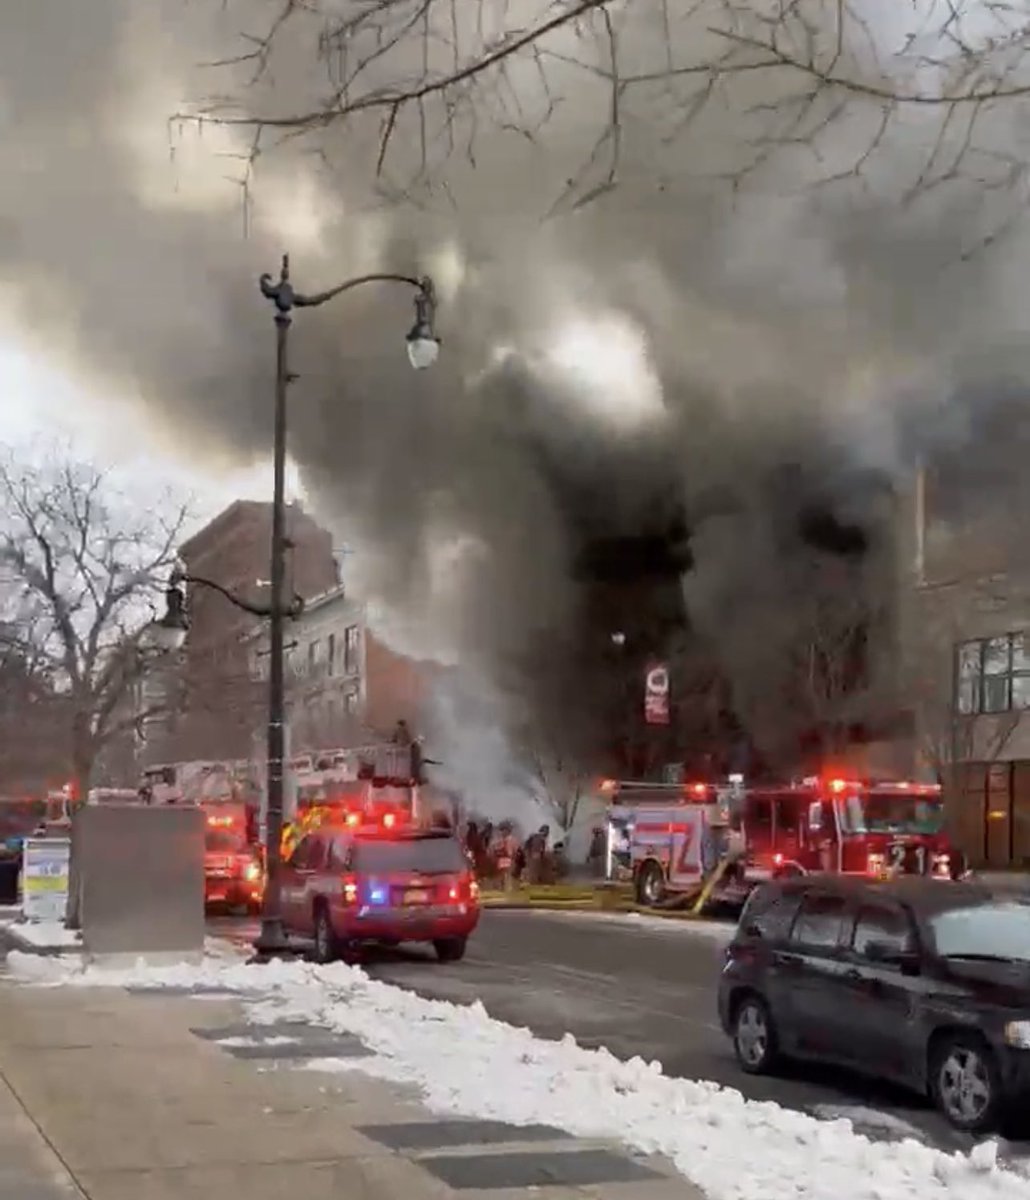 4th alarm of fire Buffalo NY, 745 Main St with partial collapse and extension to exposures